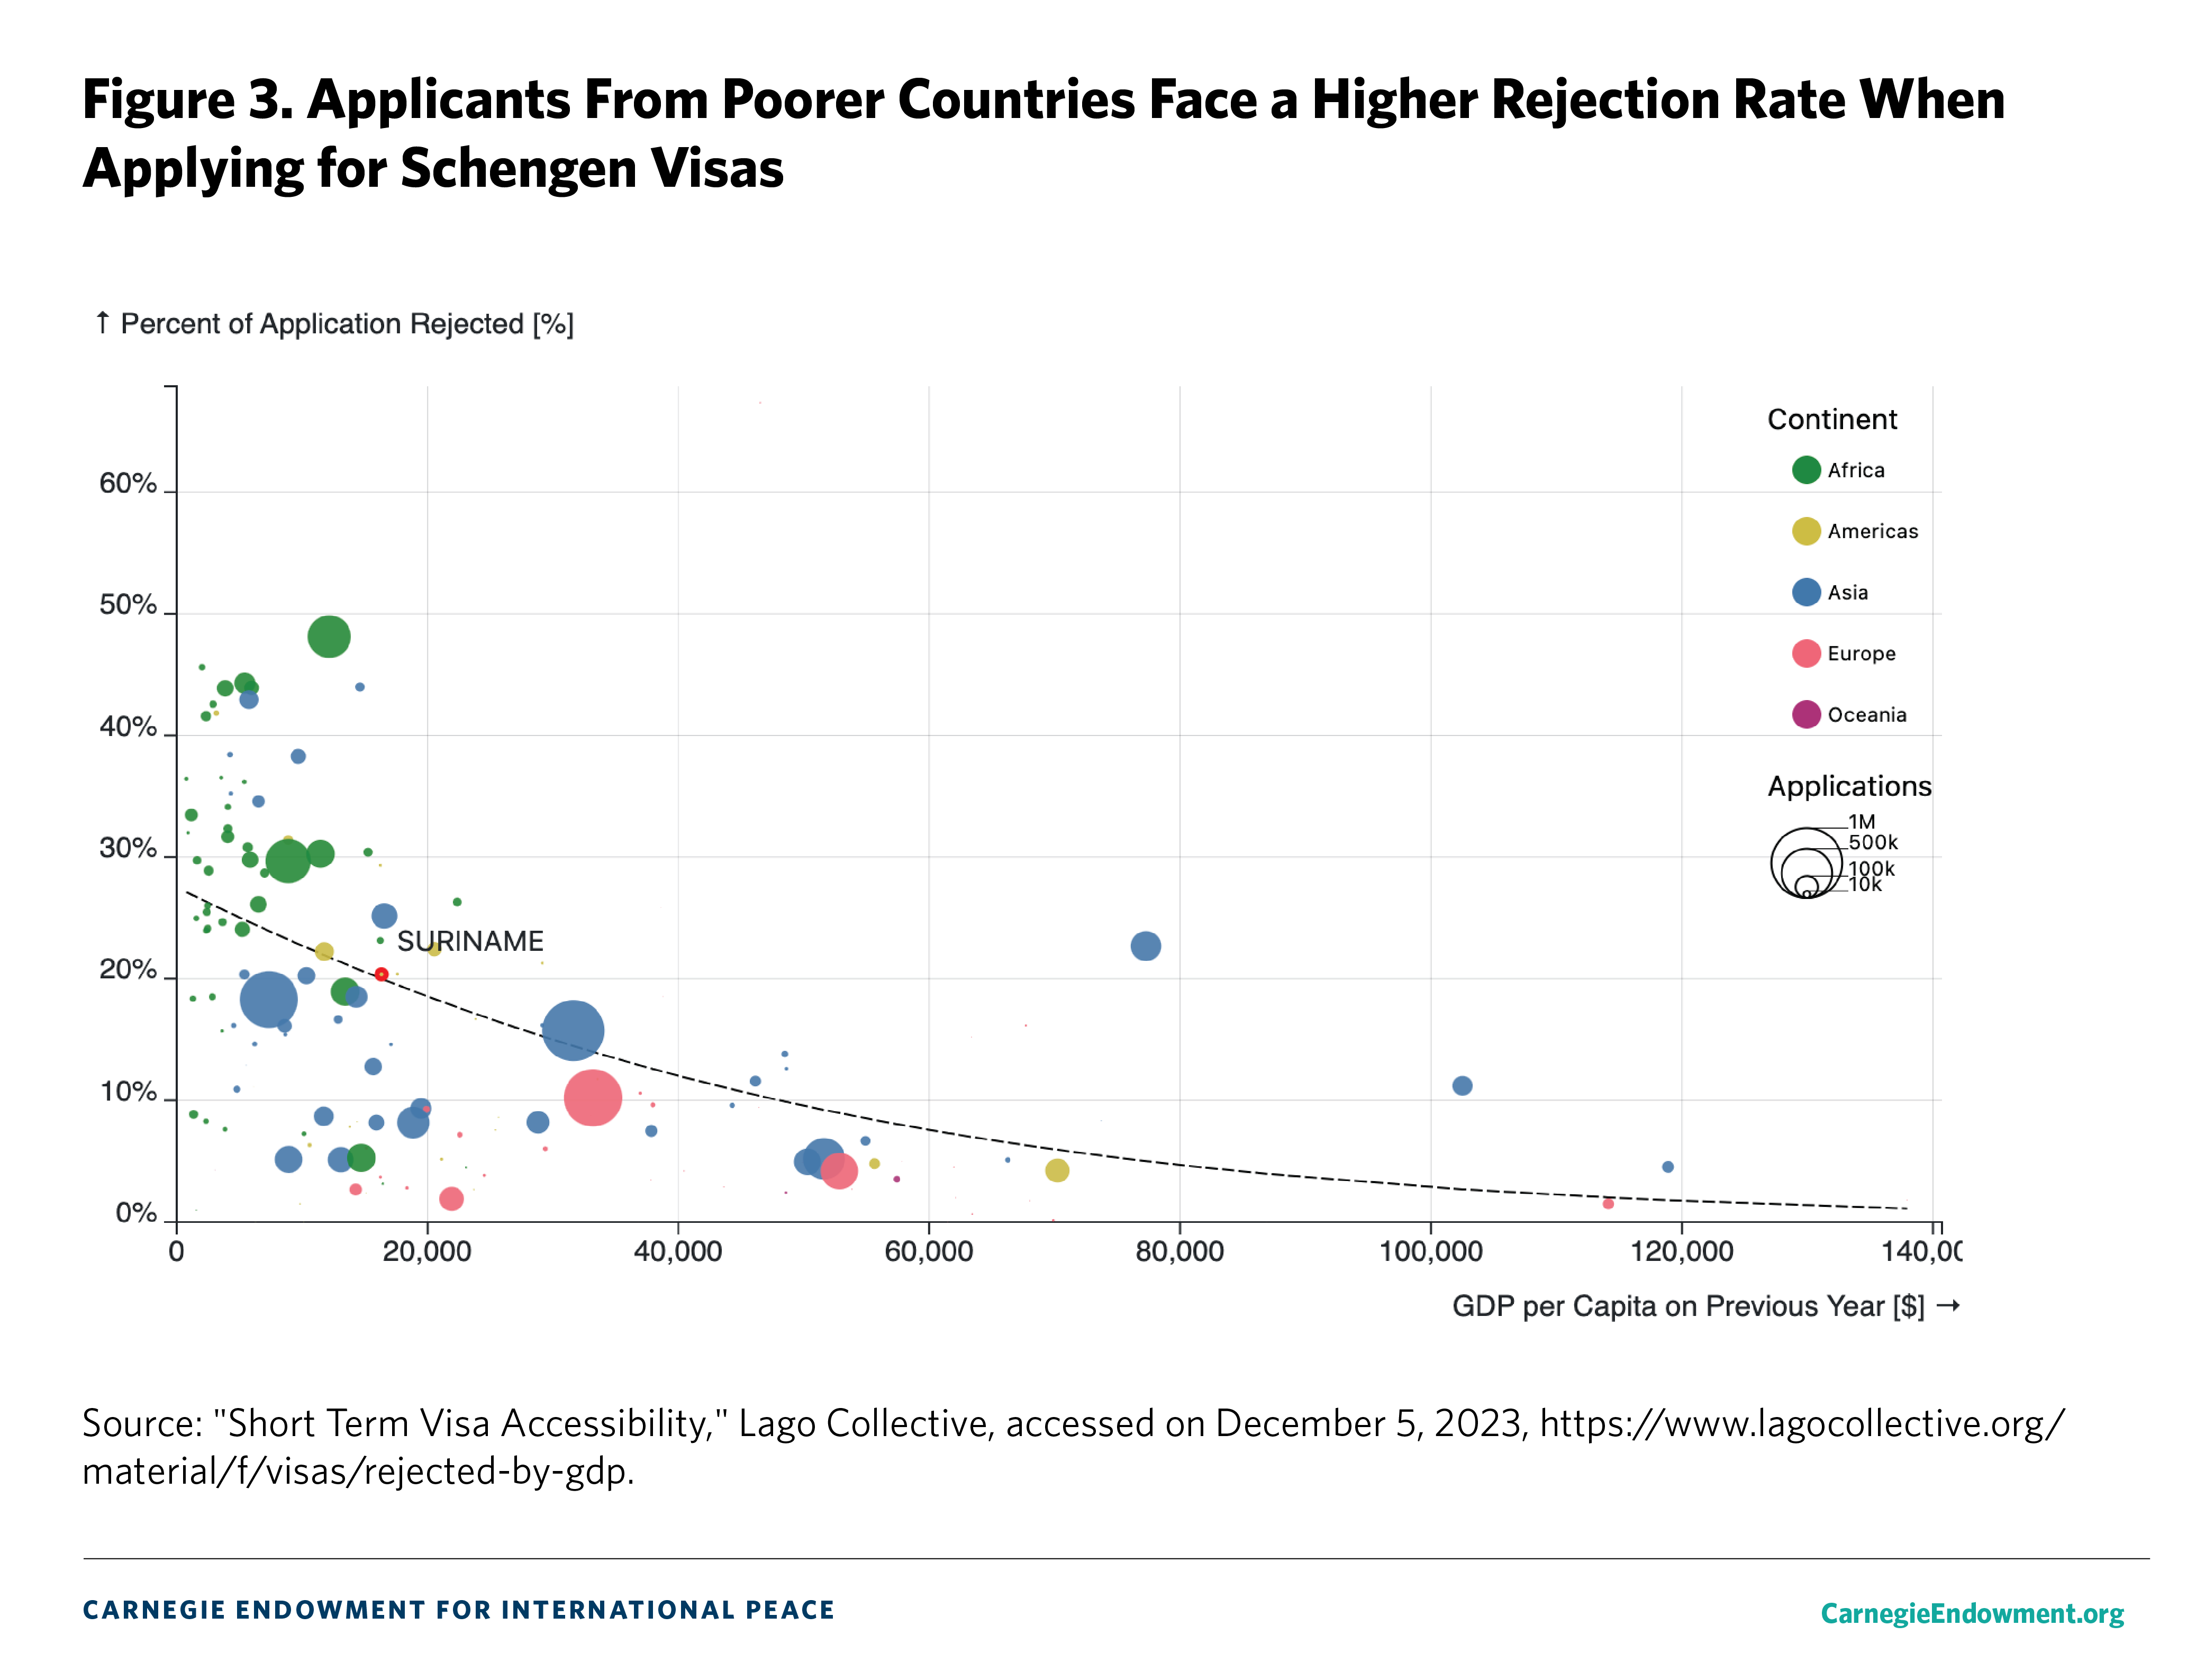 Figure 3: Appplicants from Poorer Countries Face a HIgher Rejection Rate When Applying for Schengen Visas